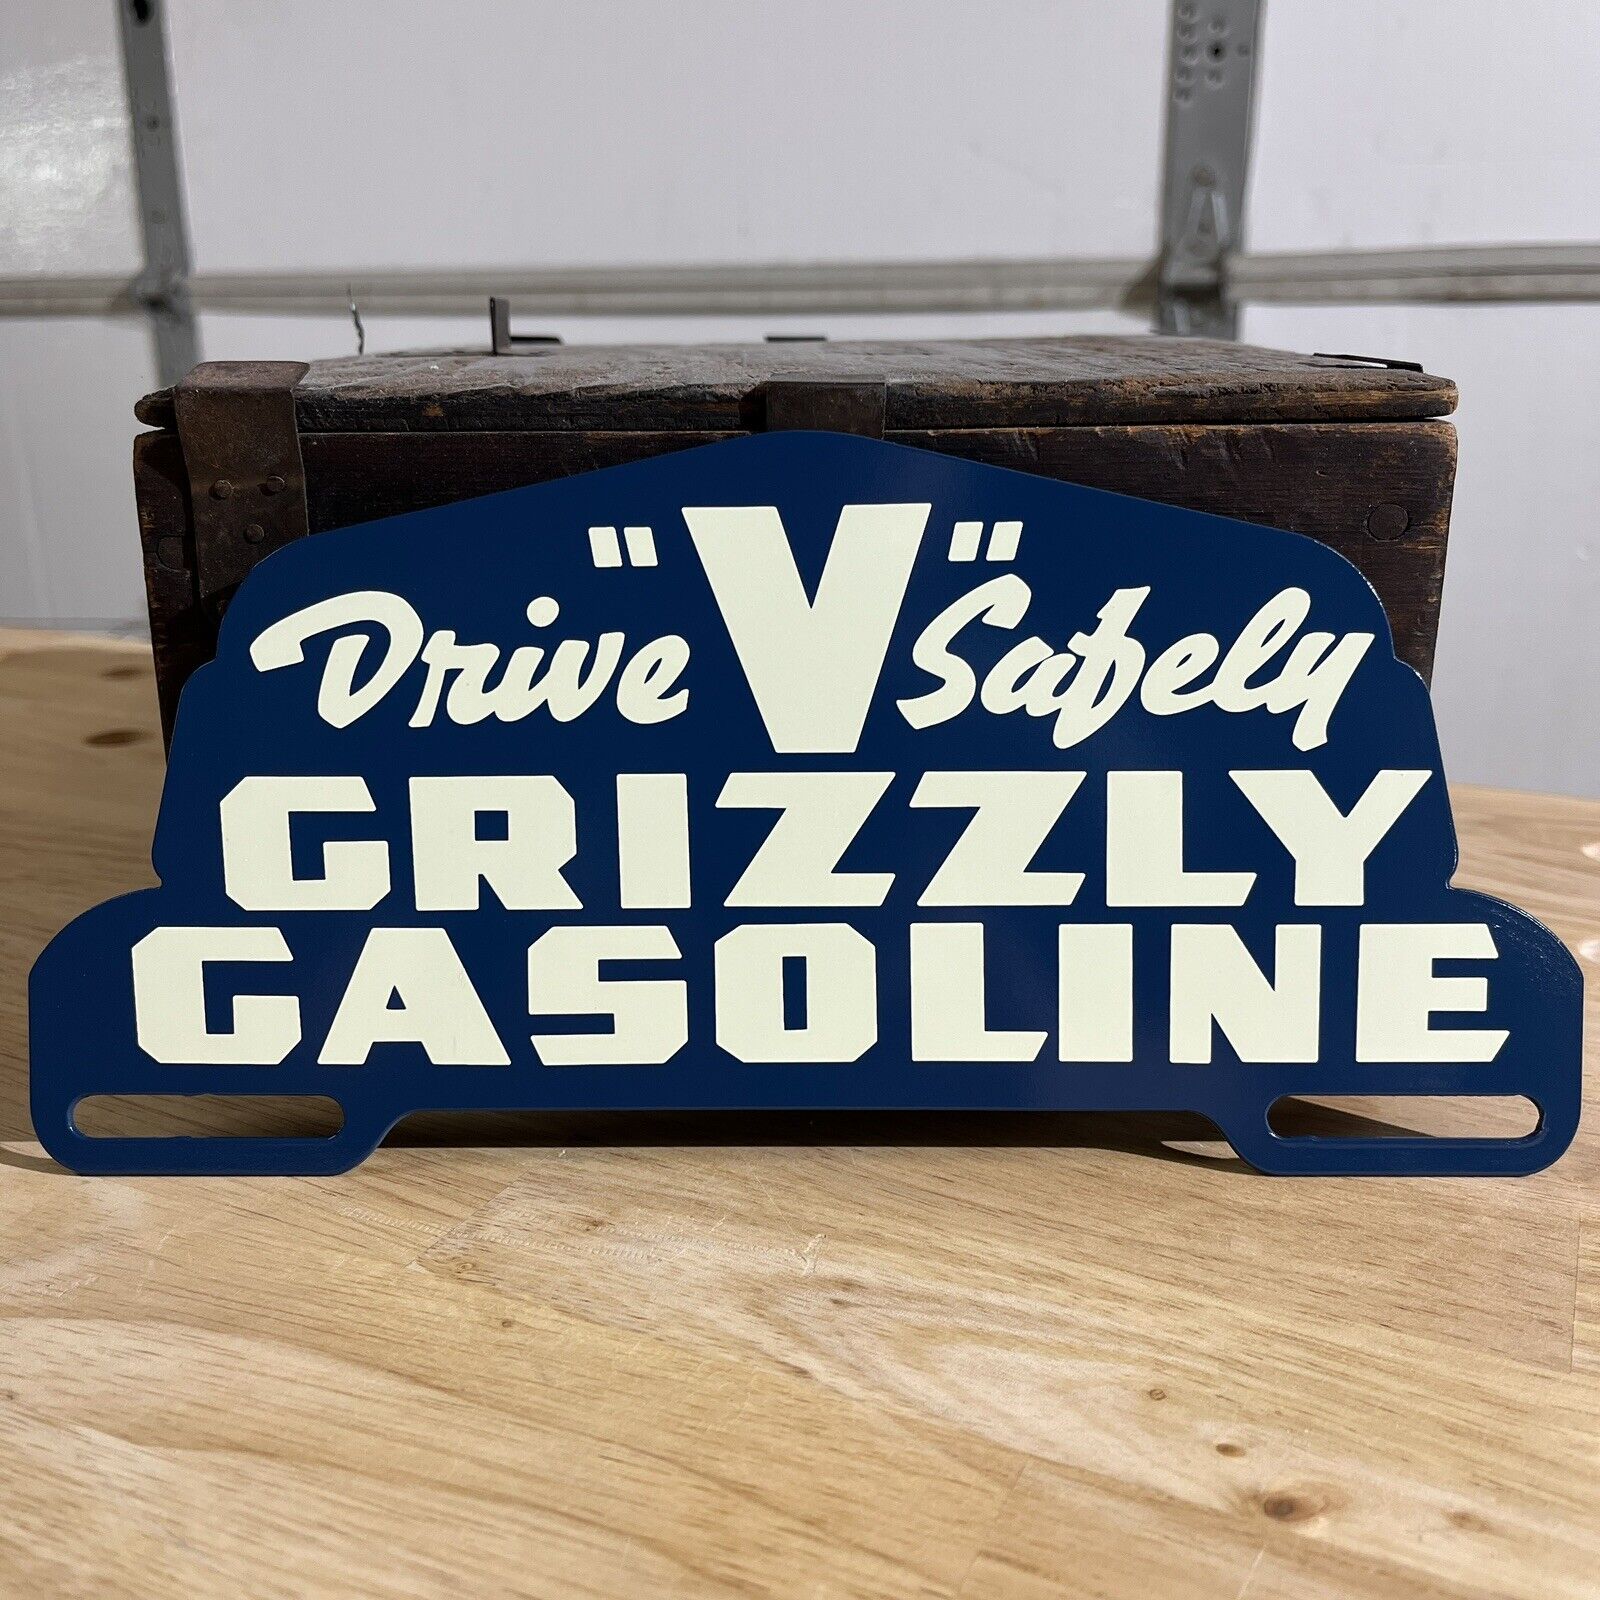 Grizzly Gasoline Drive Safely Metal License Plate Tag Topper Oil Sign